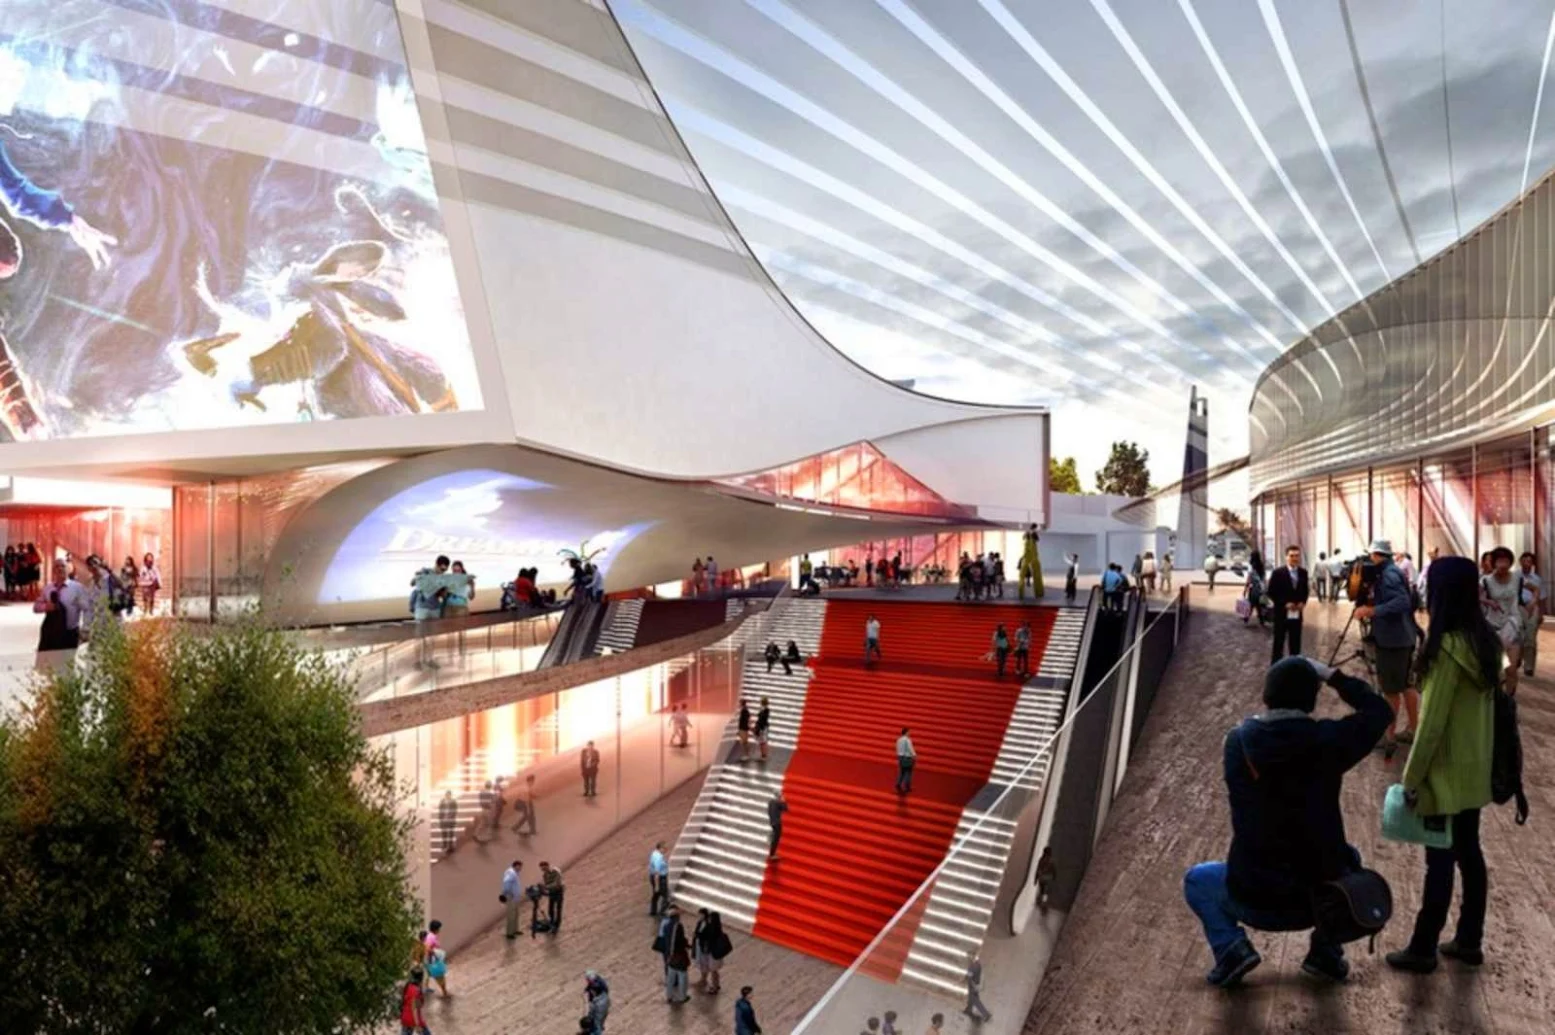 IMAX Theatre by 3XN architects